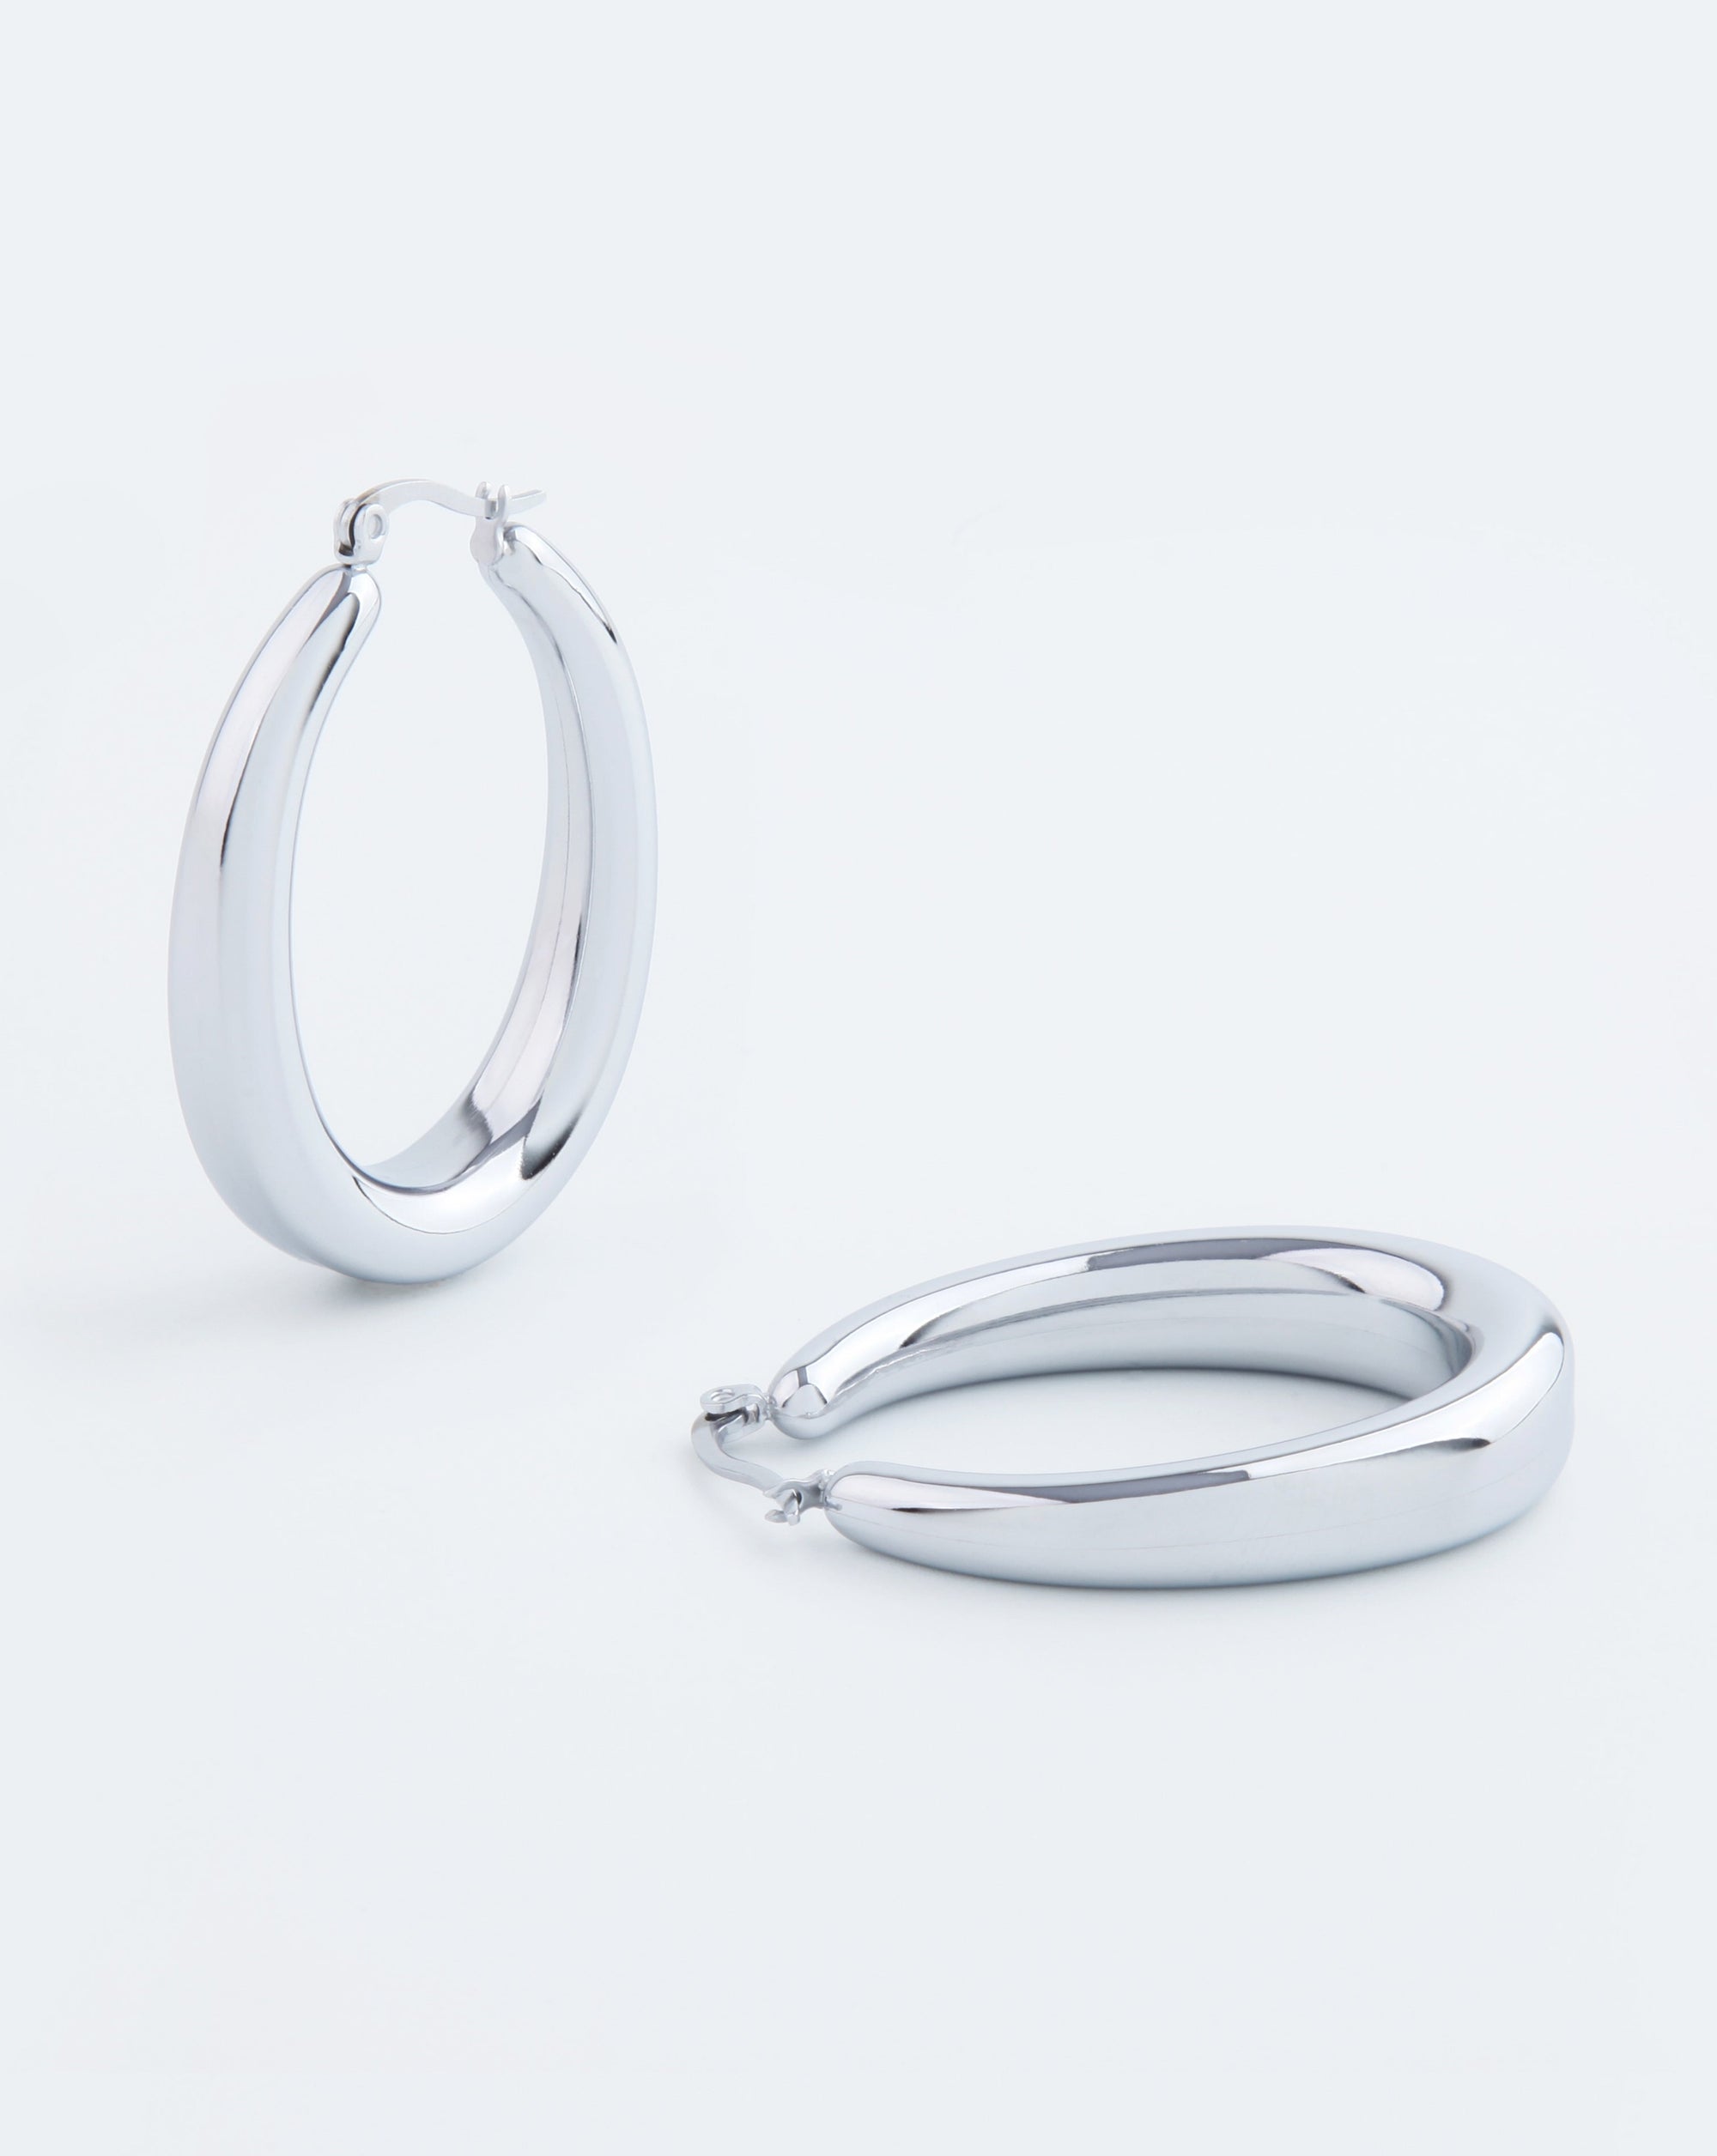 A pair of 18kt gold-plated Oval Earrings Silver by For Art's Sake® is shown against a plain white background. One earring stands upright, while the other lies flat, showcasing their glossy, polished finish. The simplistic design emphasizes their sleek, rounded shape.